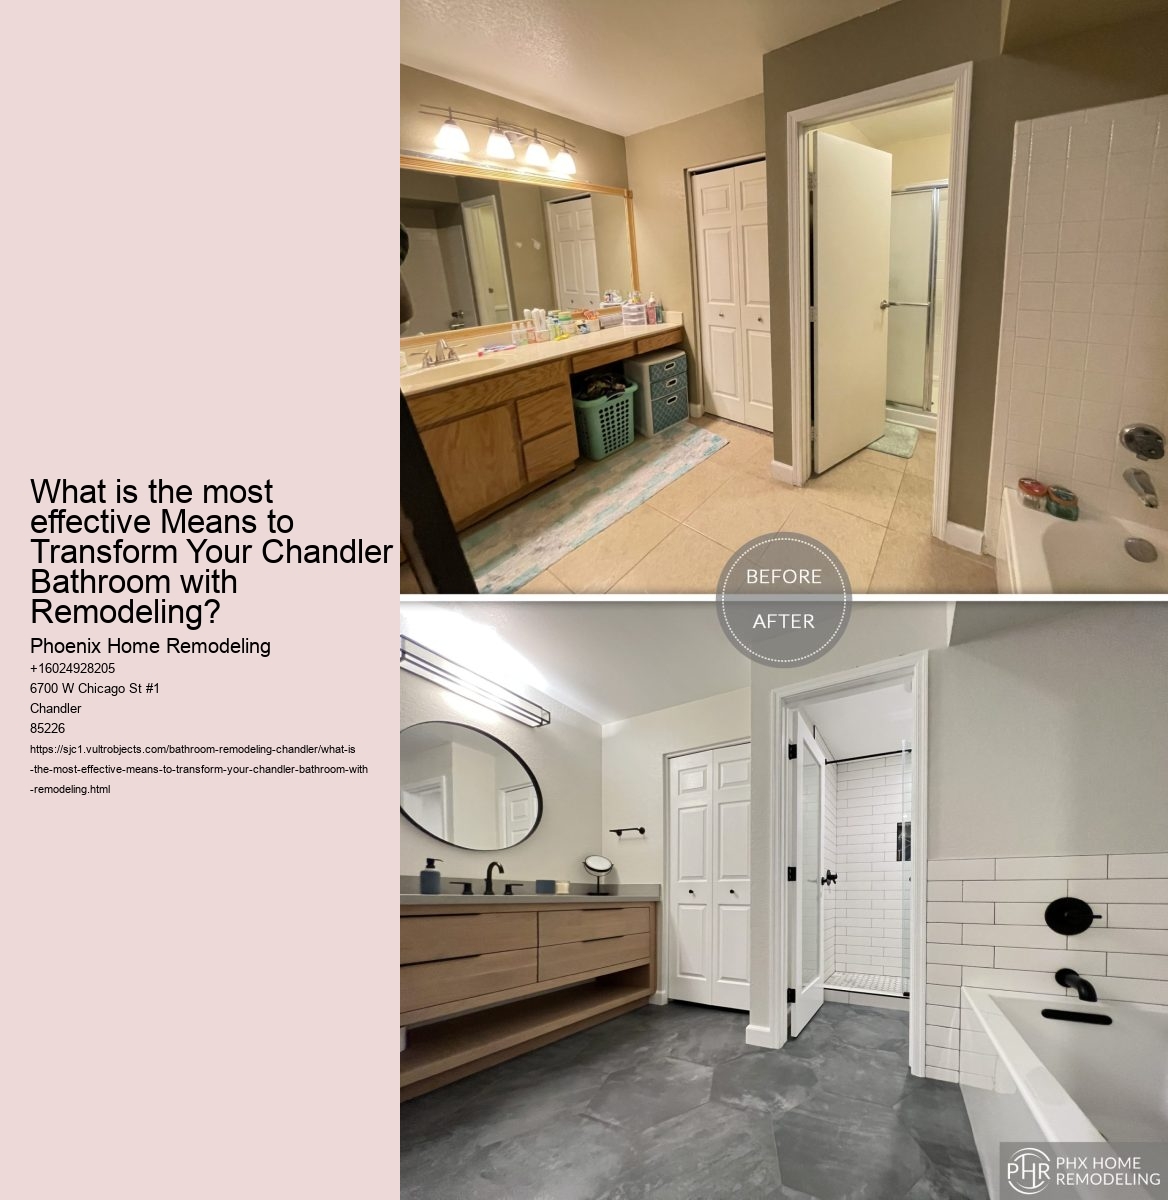 What is the most effective Means to Transform Your Chandler Bathroom with Remodeling?